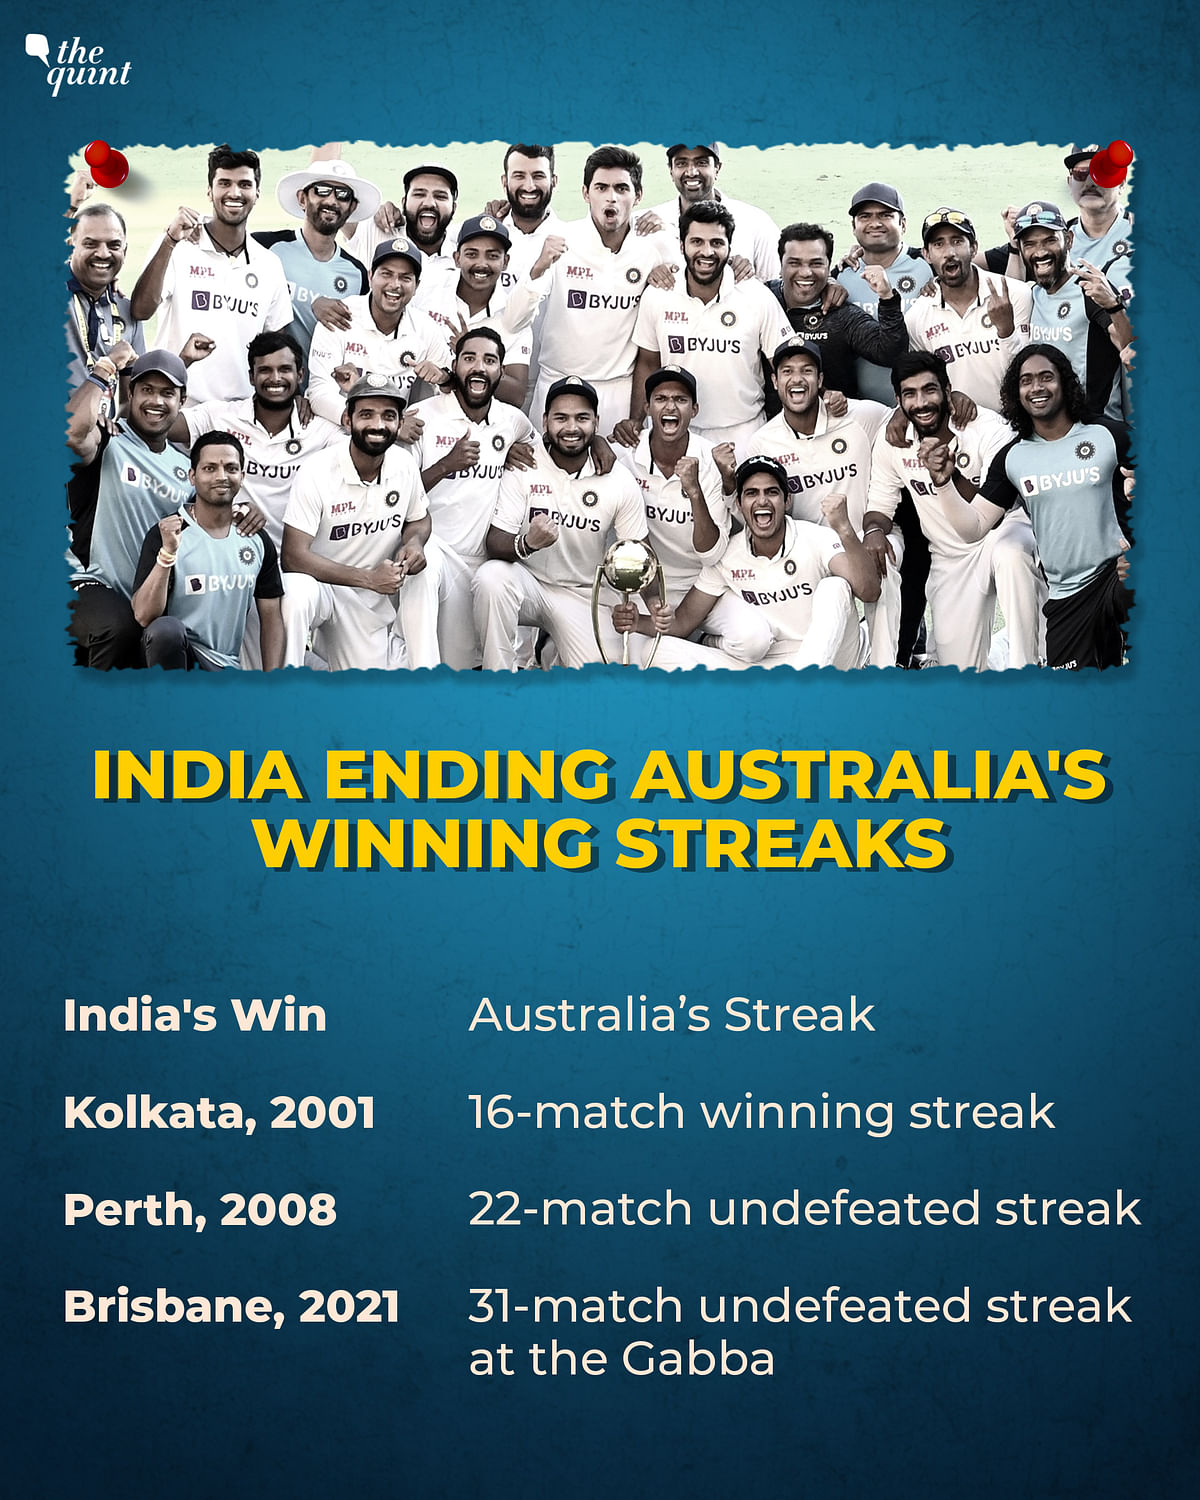 India only needed a Draw in the 4th Test match in Brisbane to retain the Border Gavaskar Trophy. 